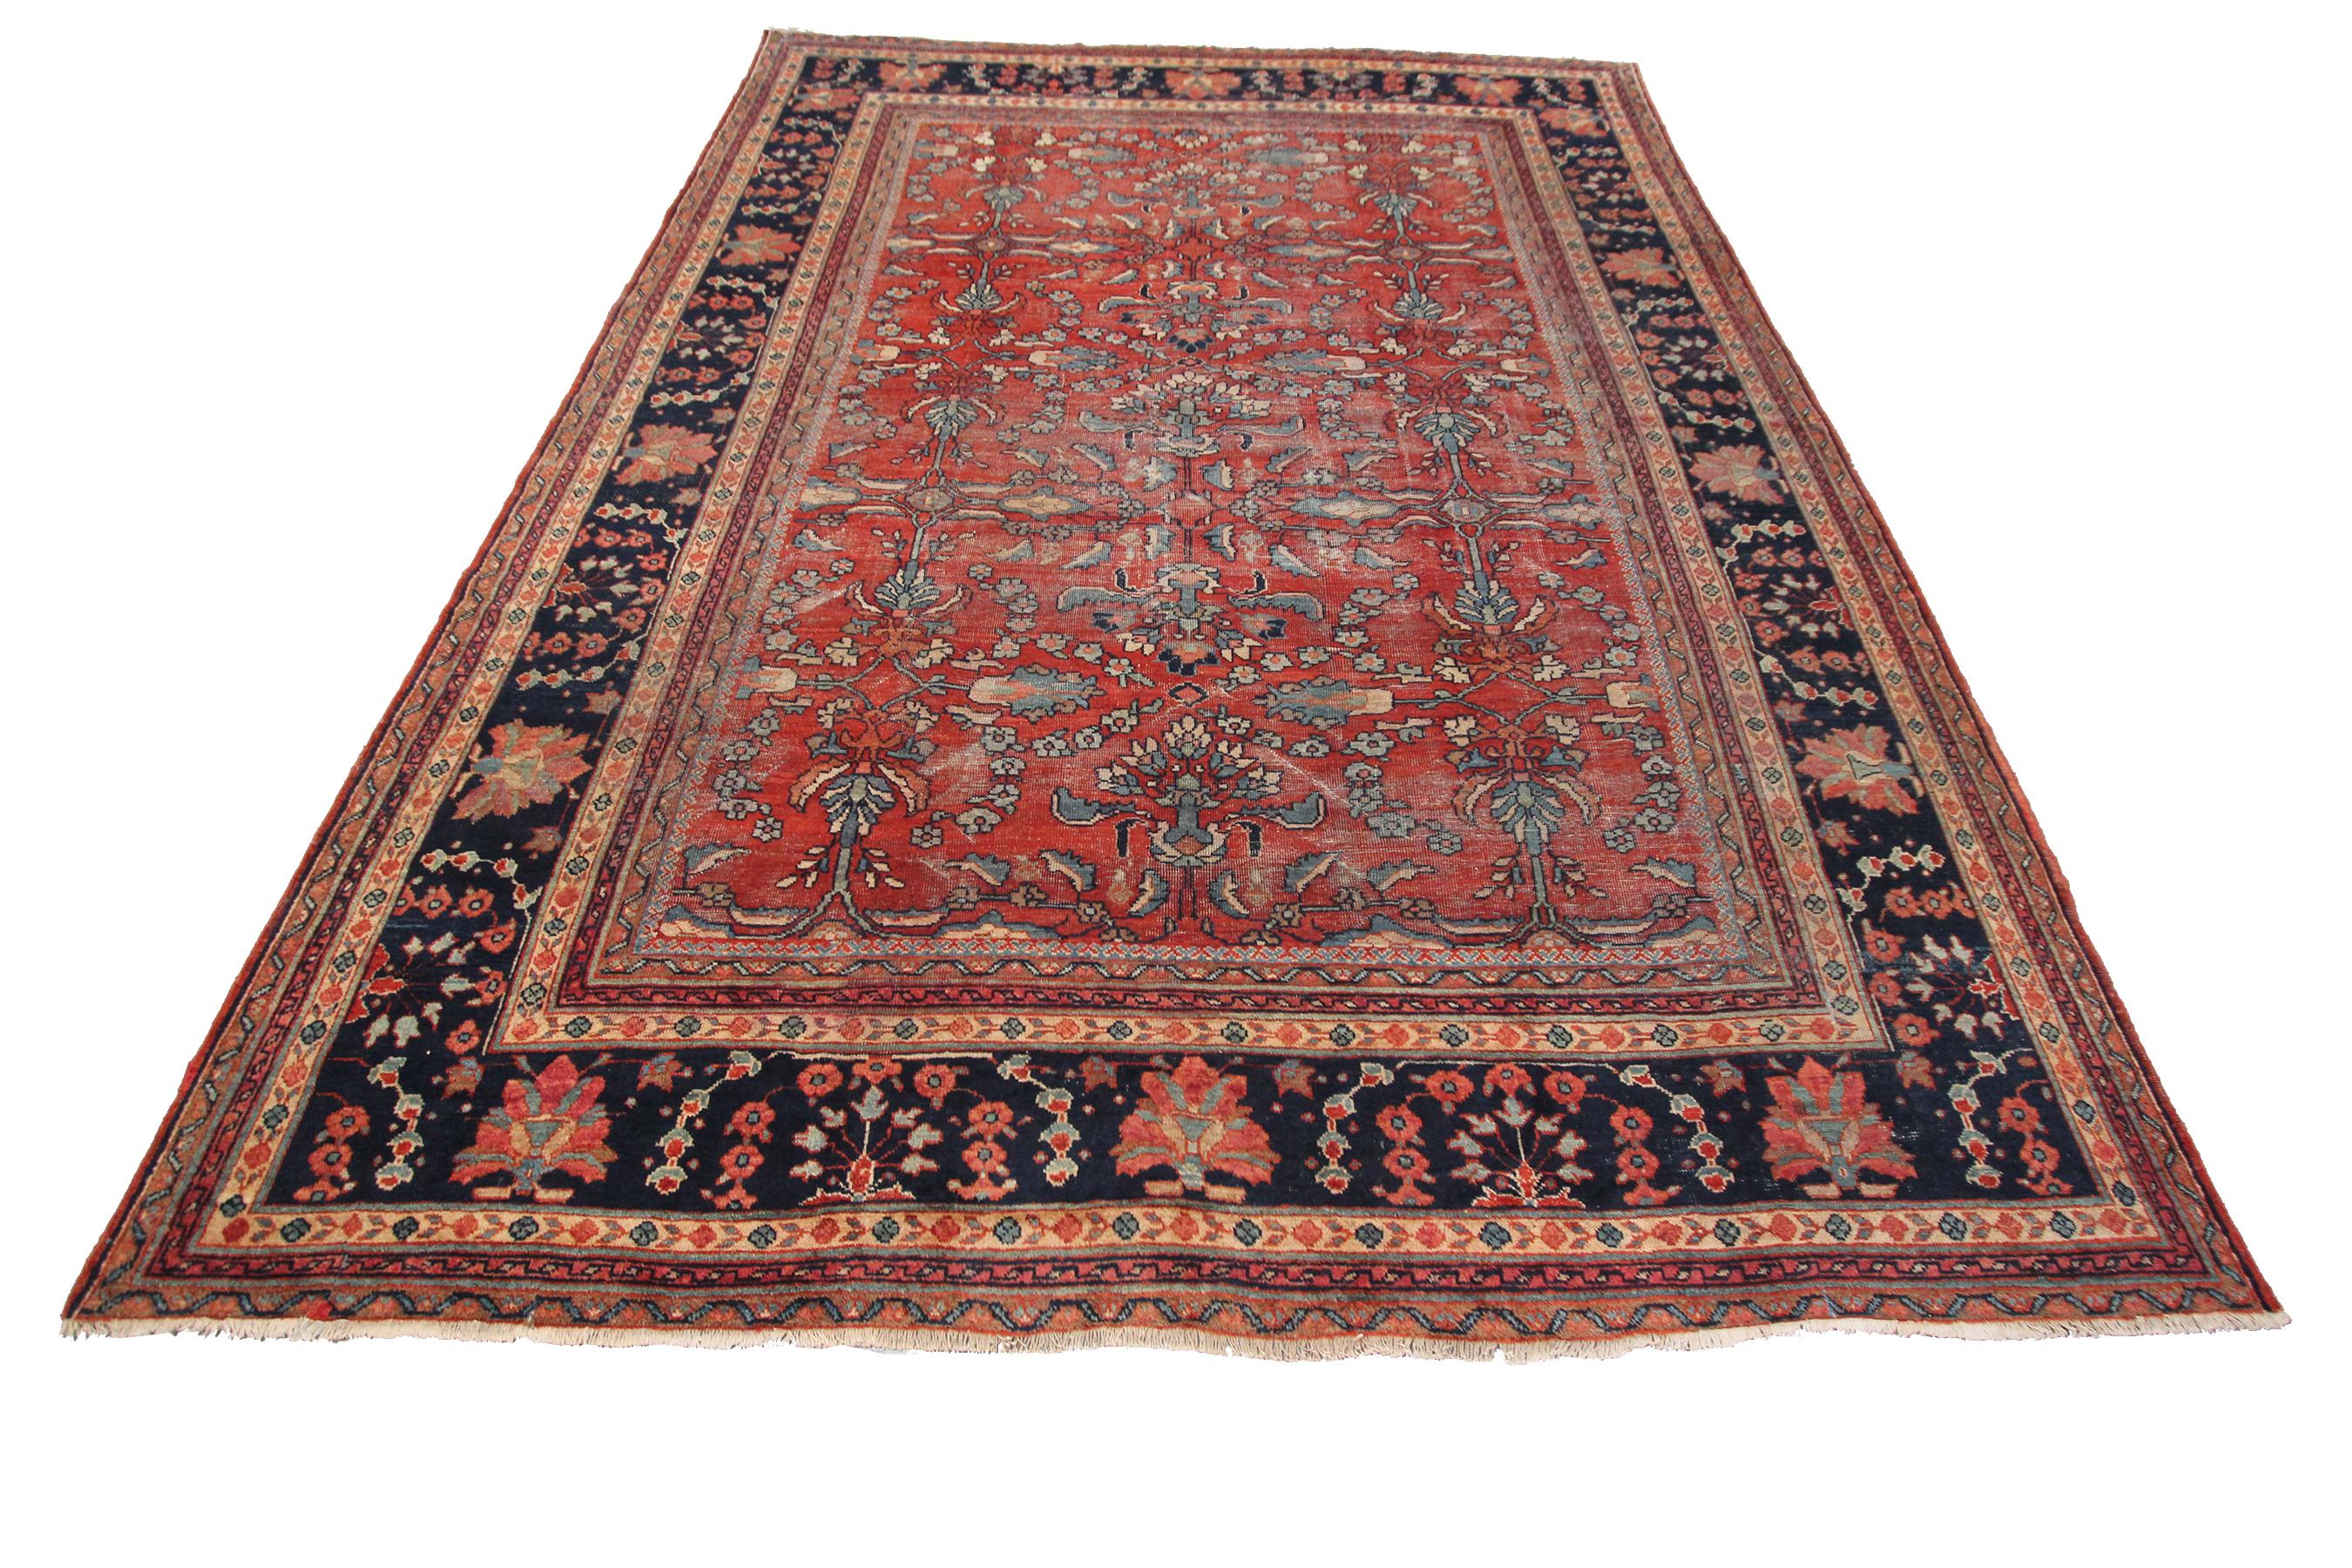 Early 20th Century Large Antique Persian Sultanabad Rug Antique Mahal Geometric For Sale